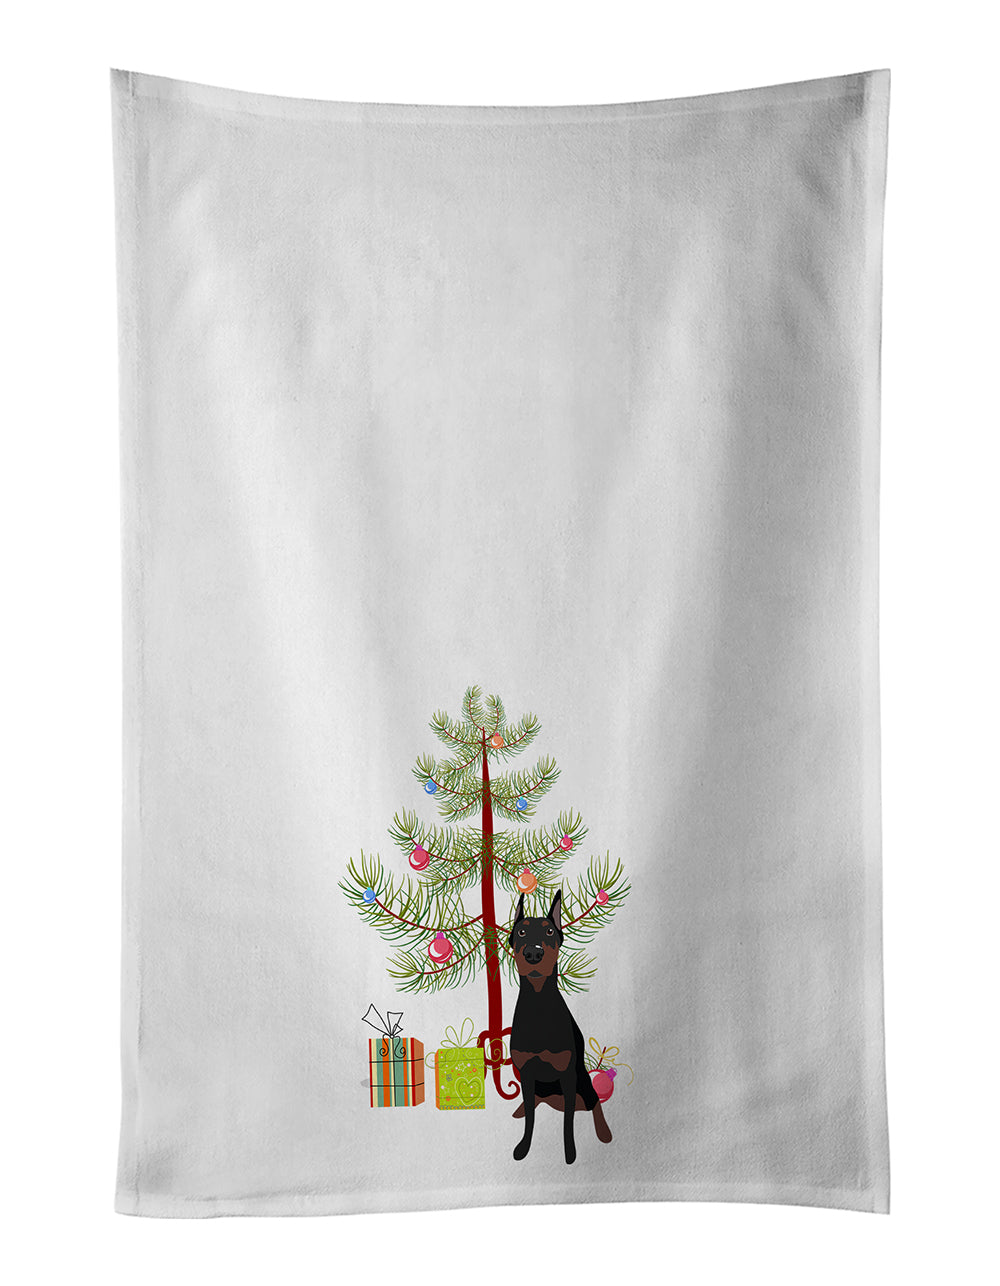 Buy this Doberman Pinscher Black Cropped Ears Christmas White Kitchen Towel Set of 2